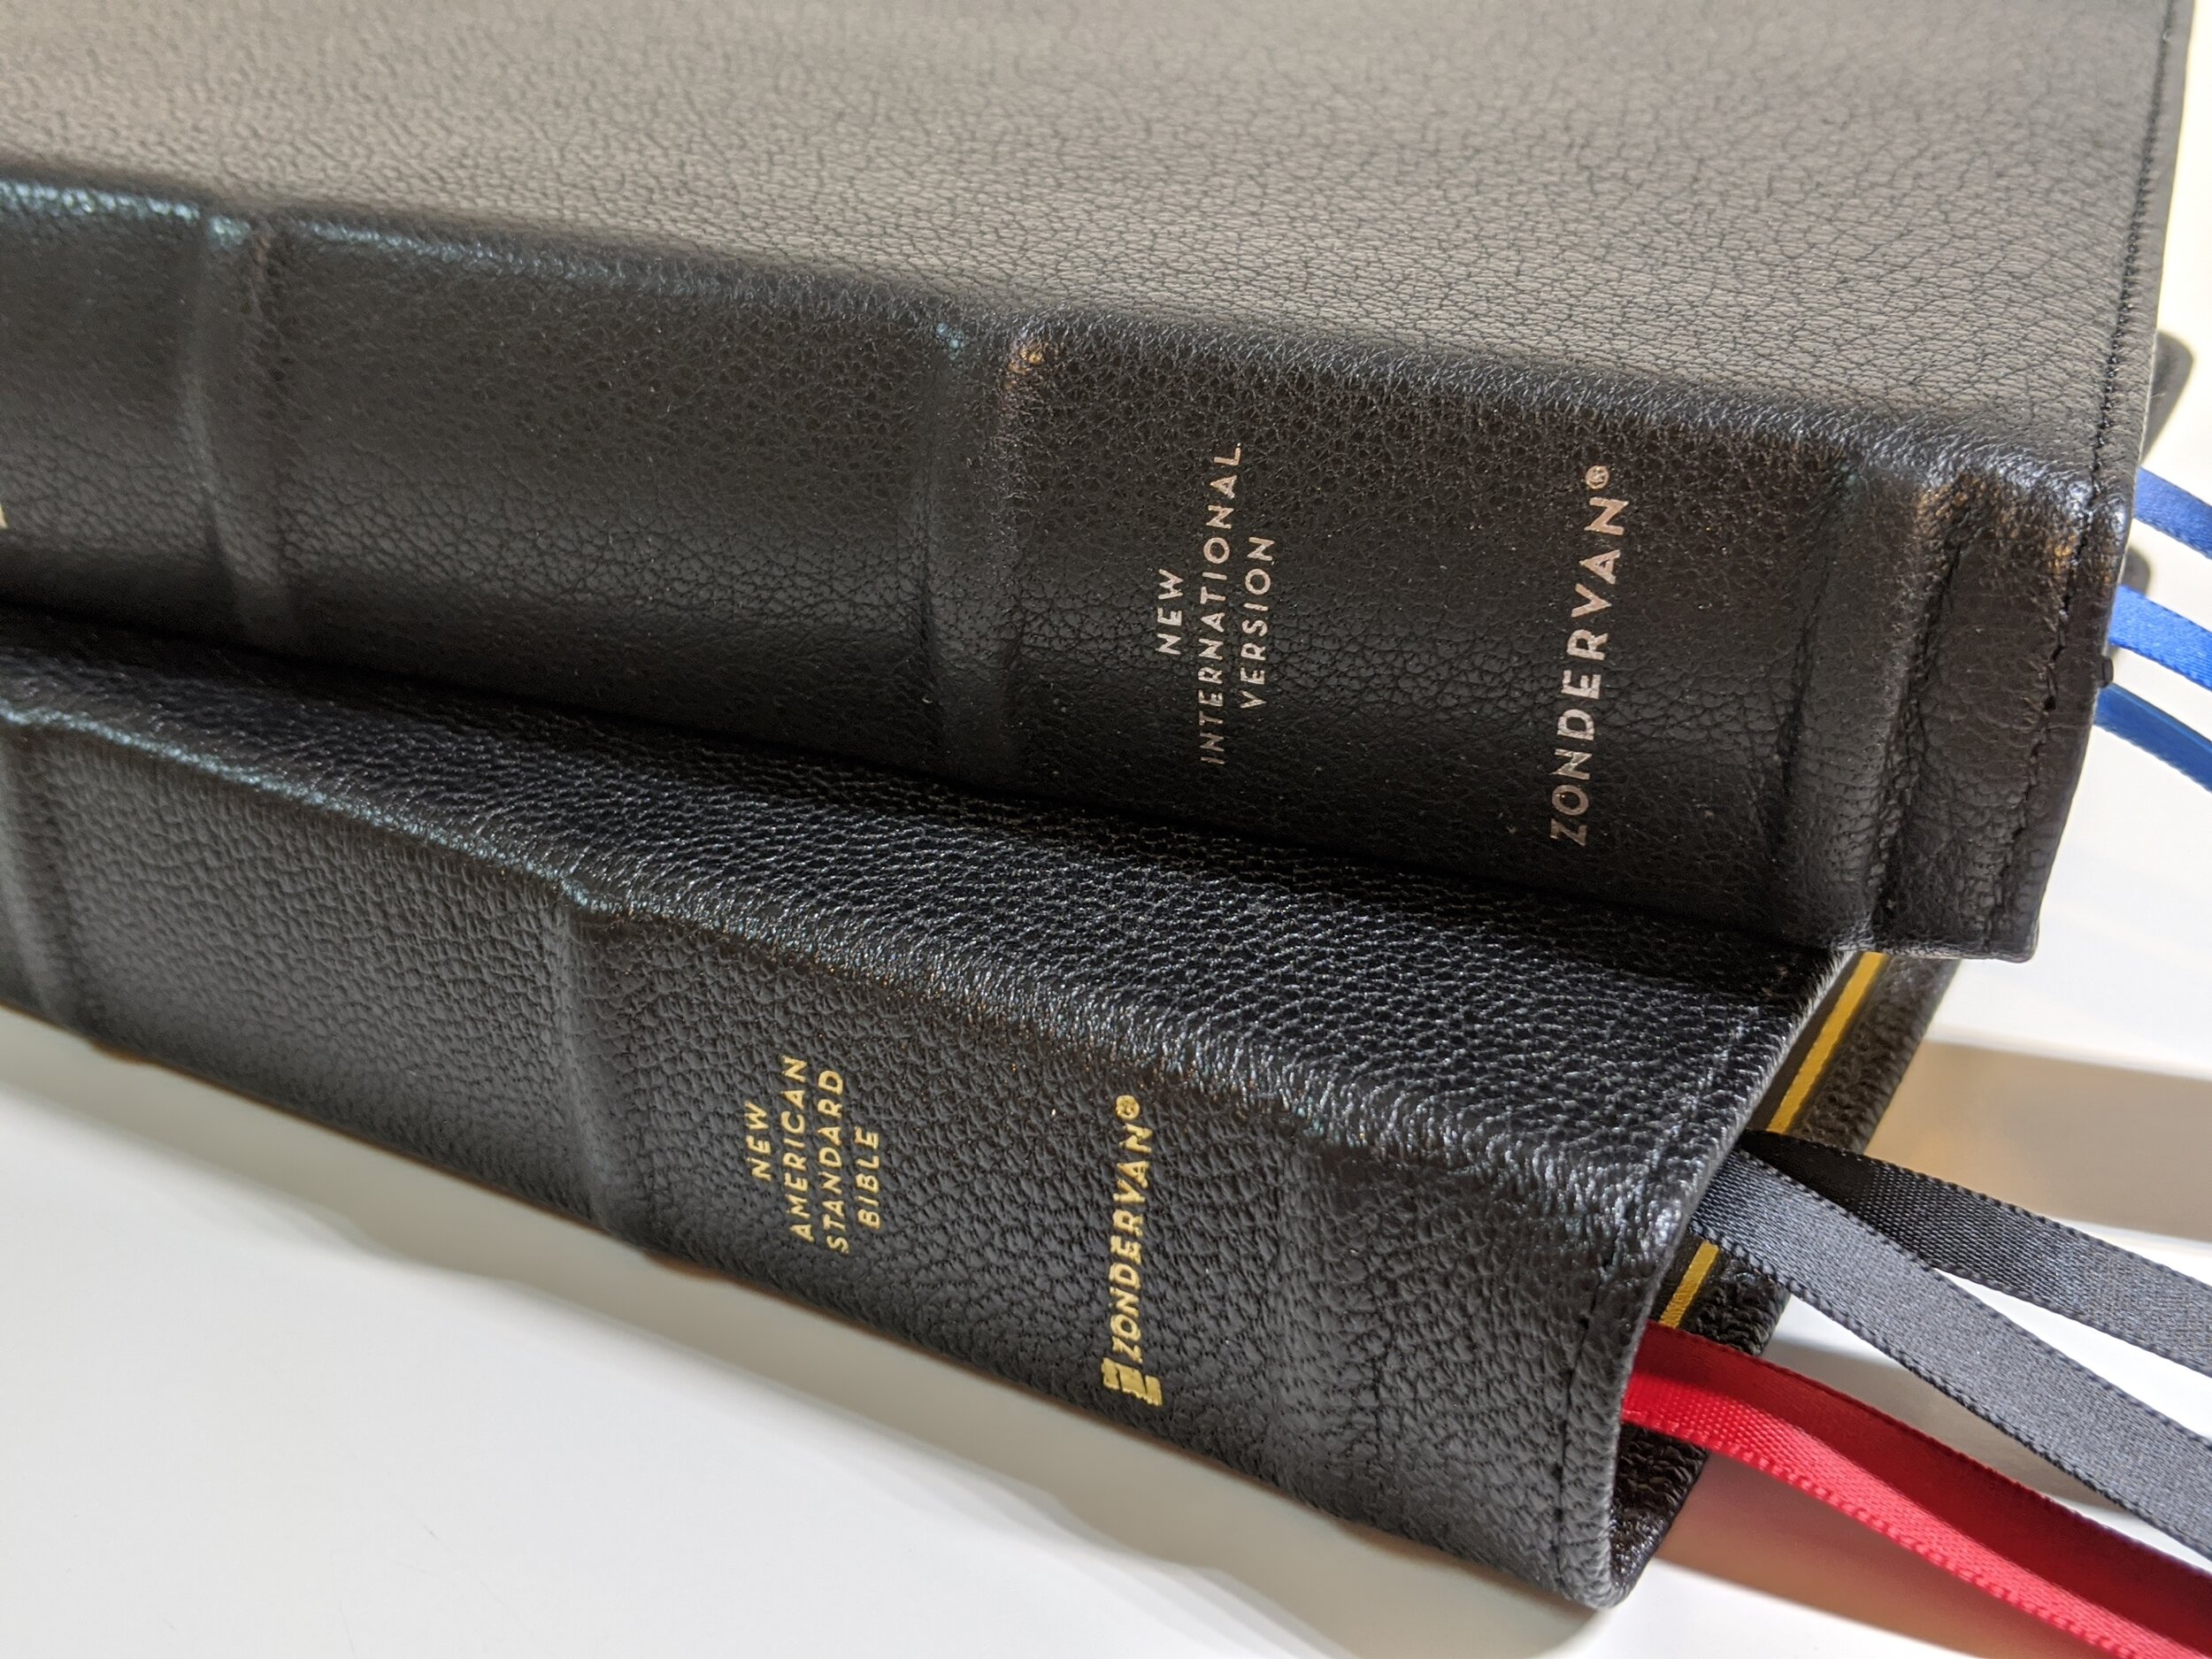  These are both produced by Zondervan in China. The NASB goatskin outshines the NIV. Zondervan’s Premier Collection gets better with every new release. 